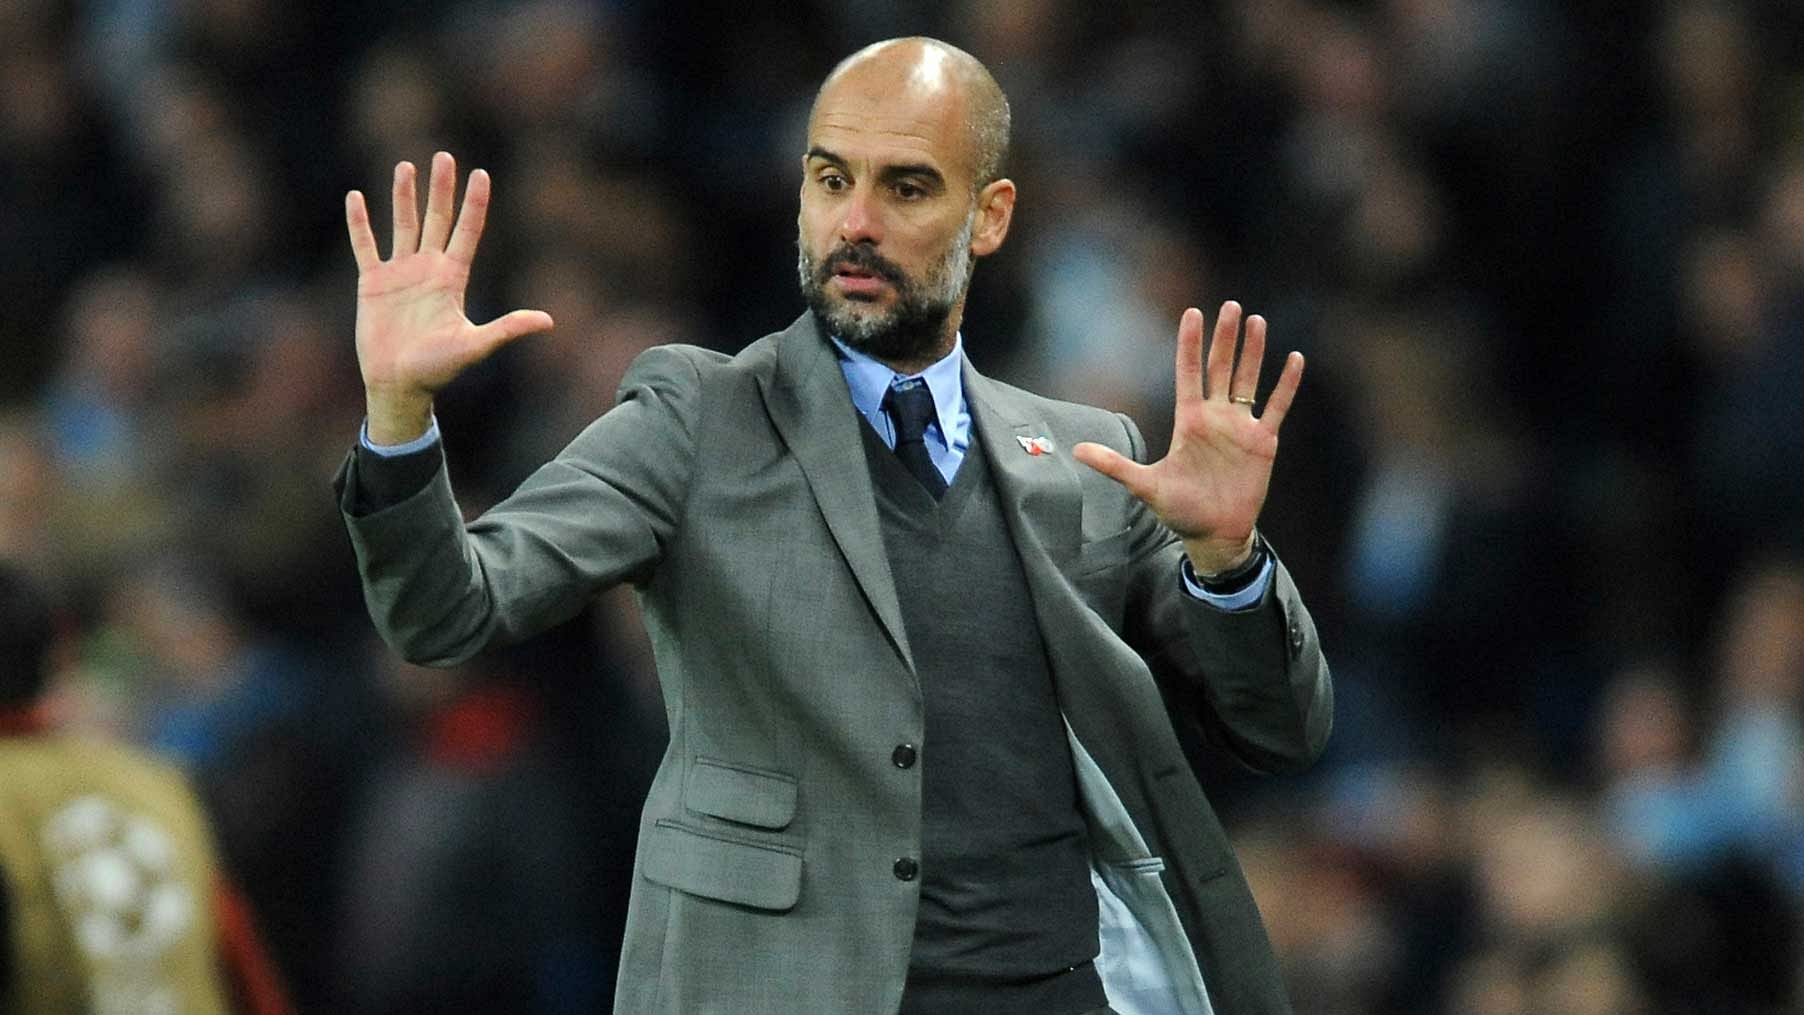 Pep Guardiola signed a three-year deal with Manchester City when he joined the club.